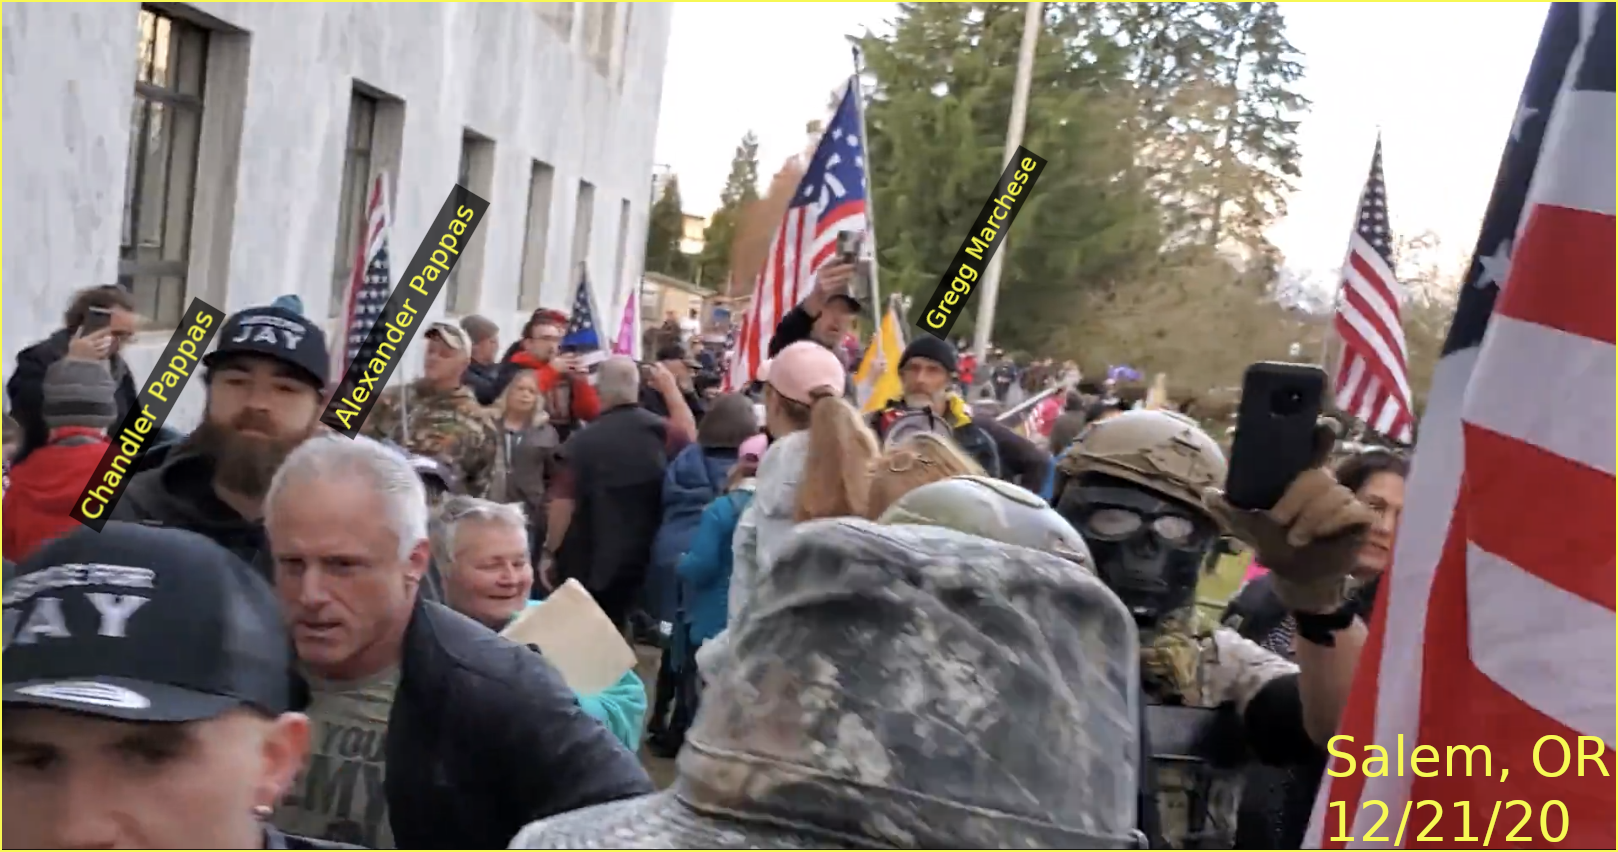 - IMAGE - View of the crowd at capitol building in Salem Oregon including Chandler Pappas, Alexander Pappas, and Gregg Marchese.